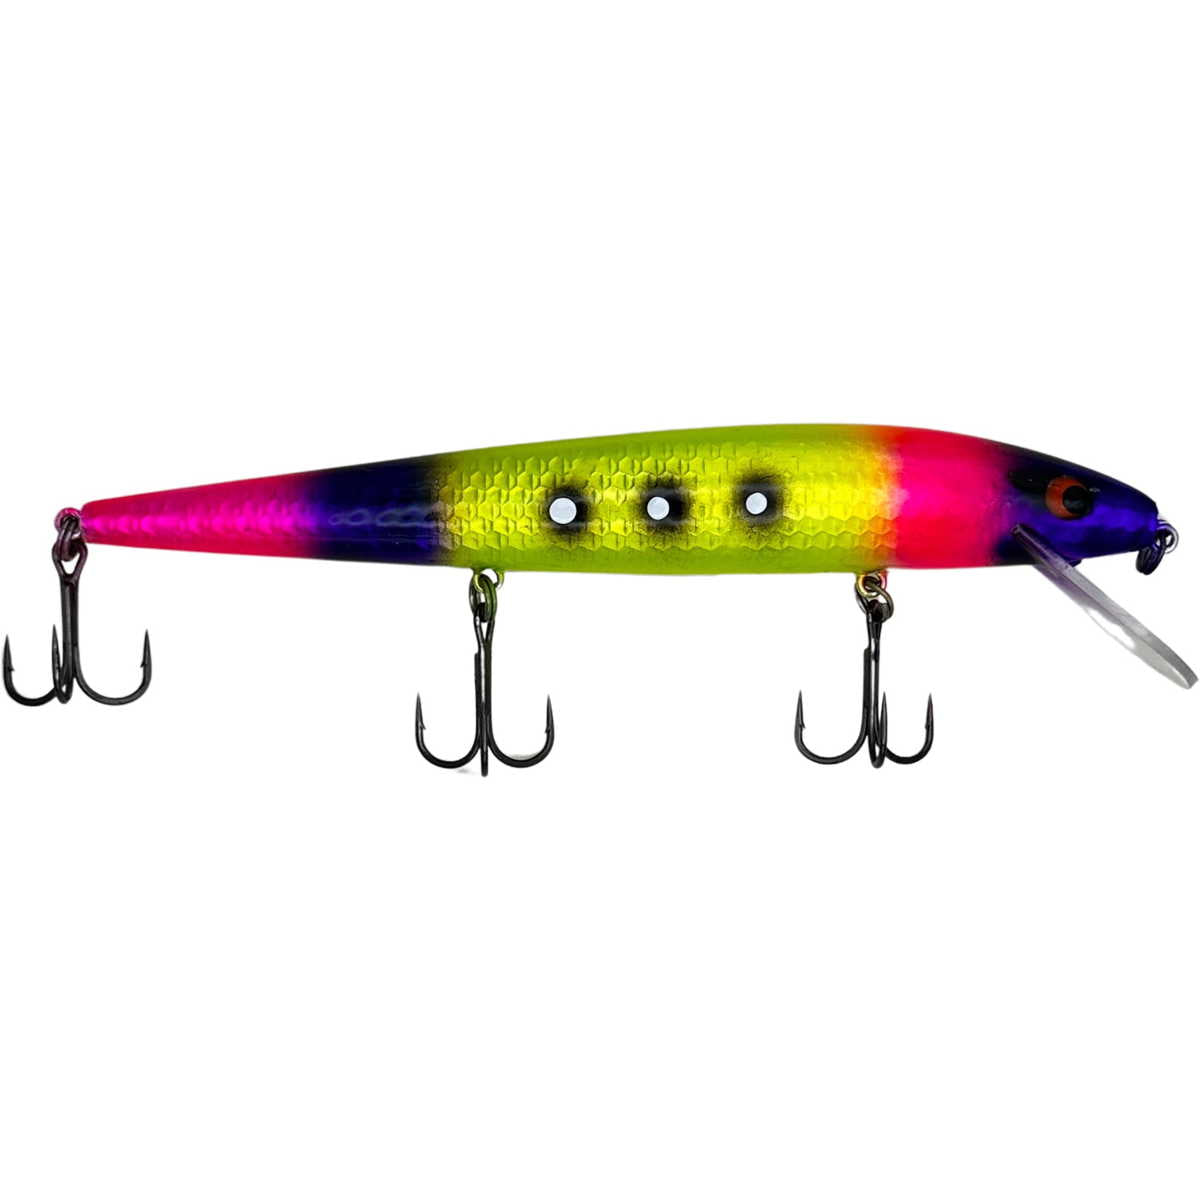 JT Custom Tackle Handpainted Smithwick Perfect 10 Rogue - United